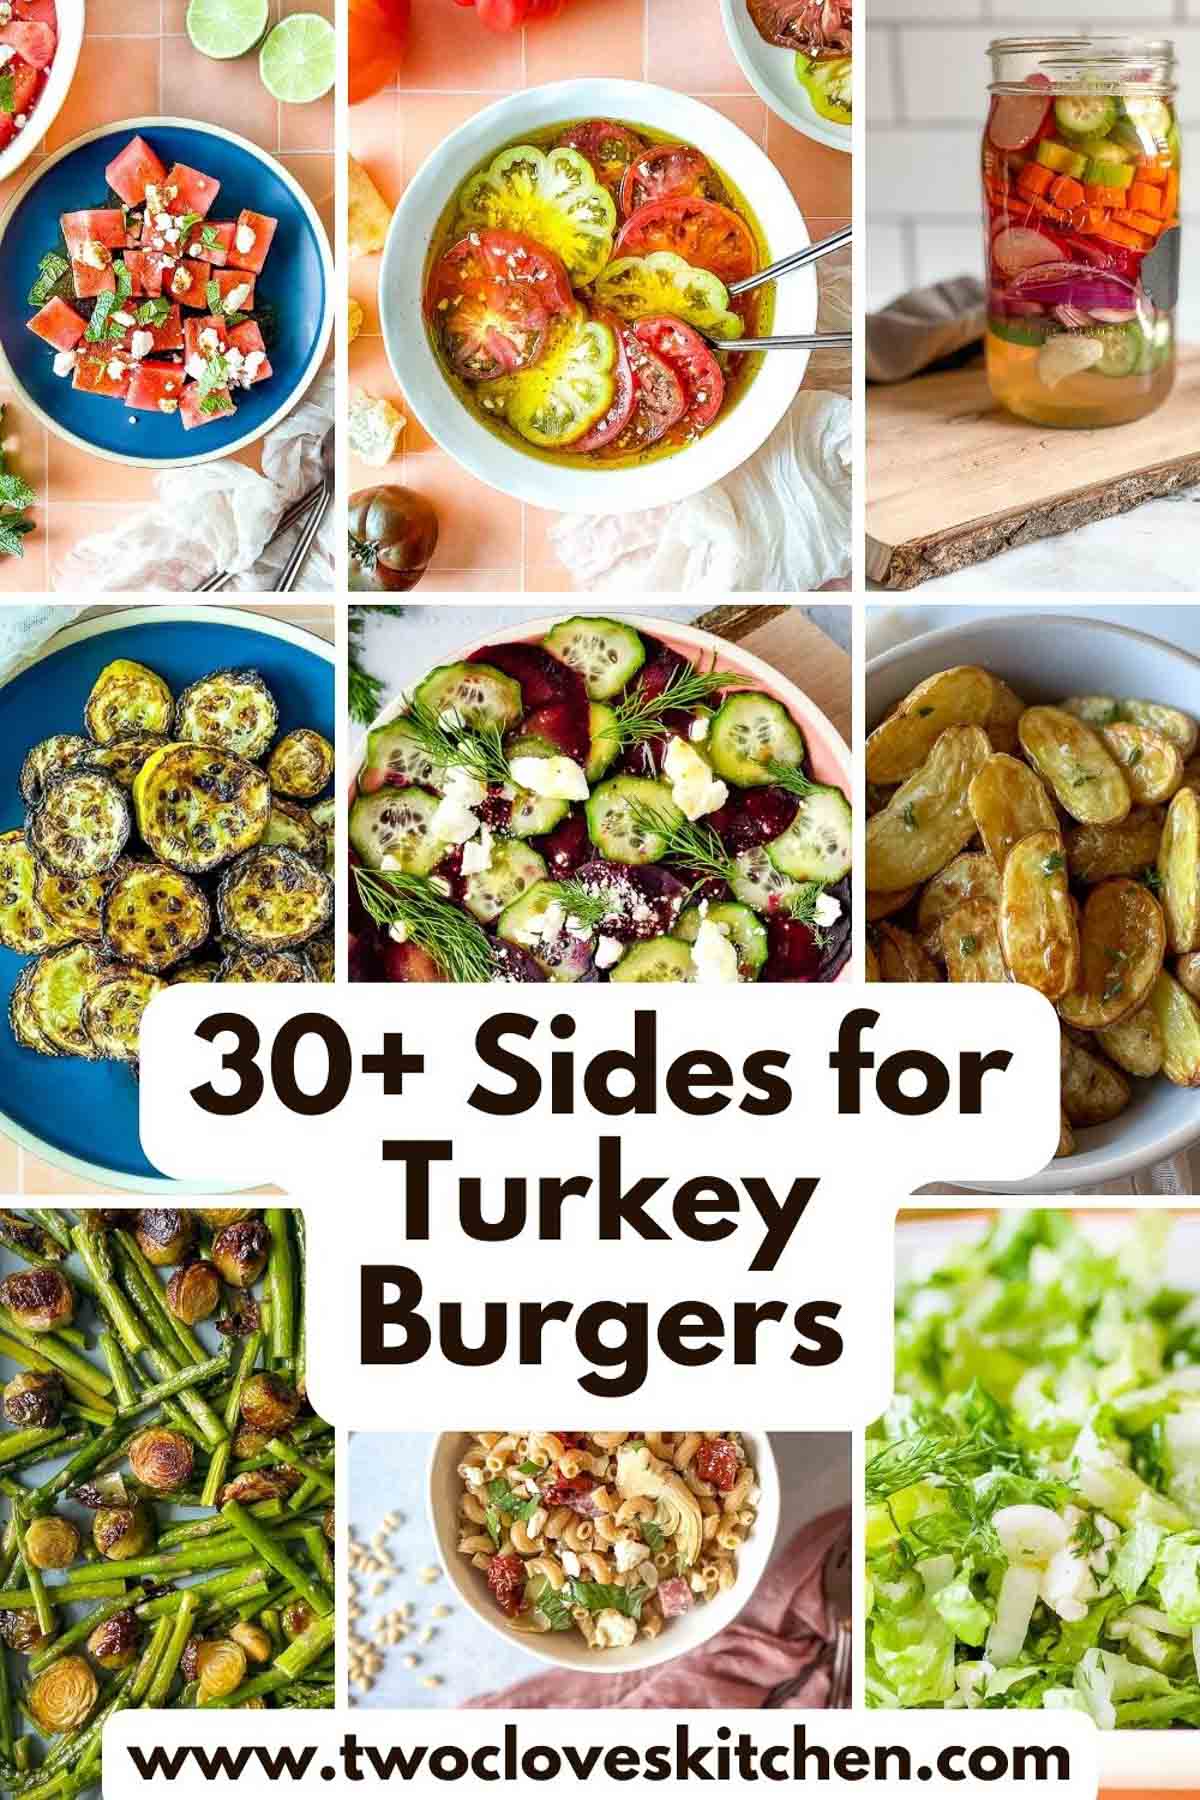 A collage of salads and vegetable sides with the text 30 plus sides for turkey burgers.